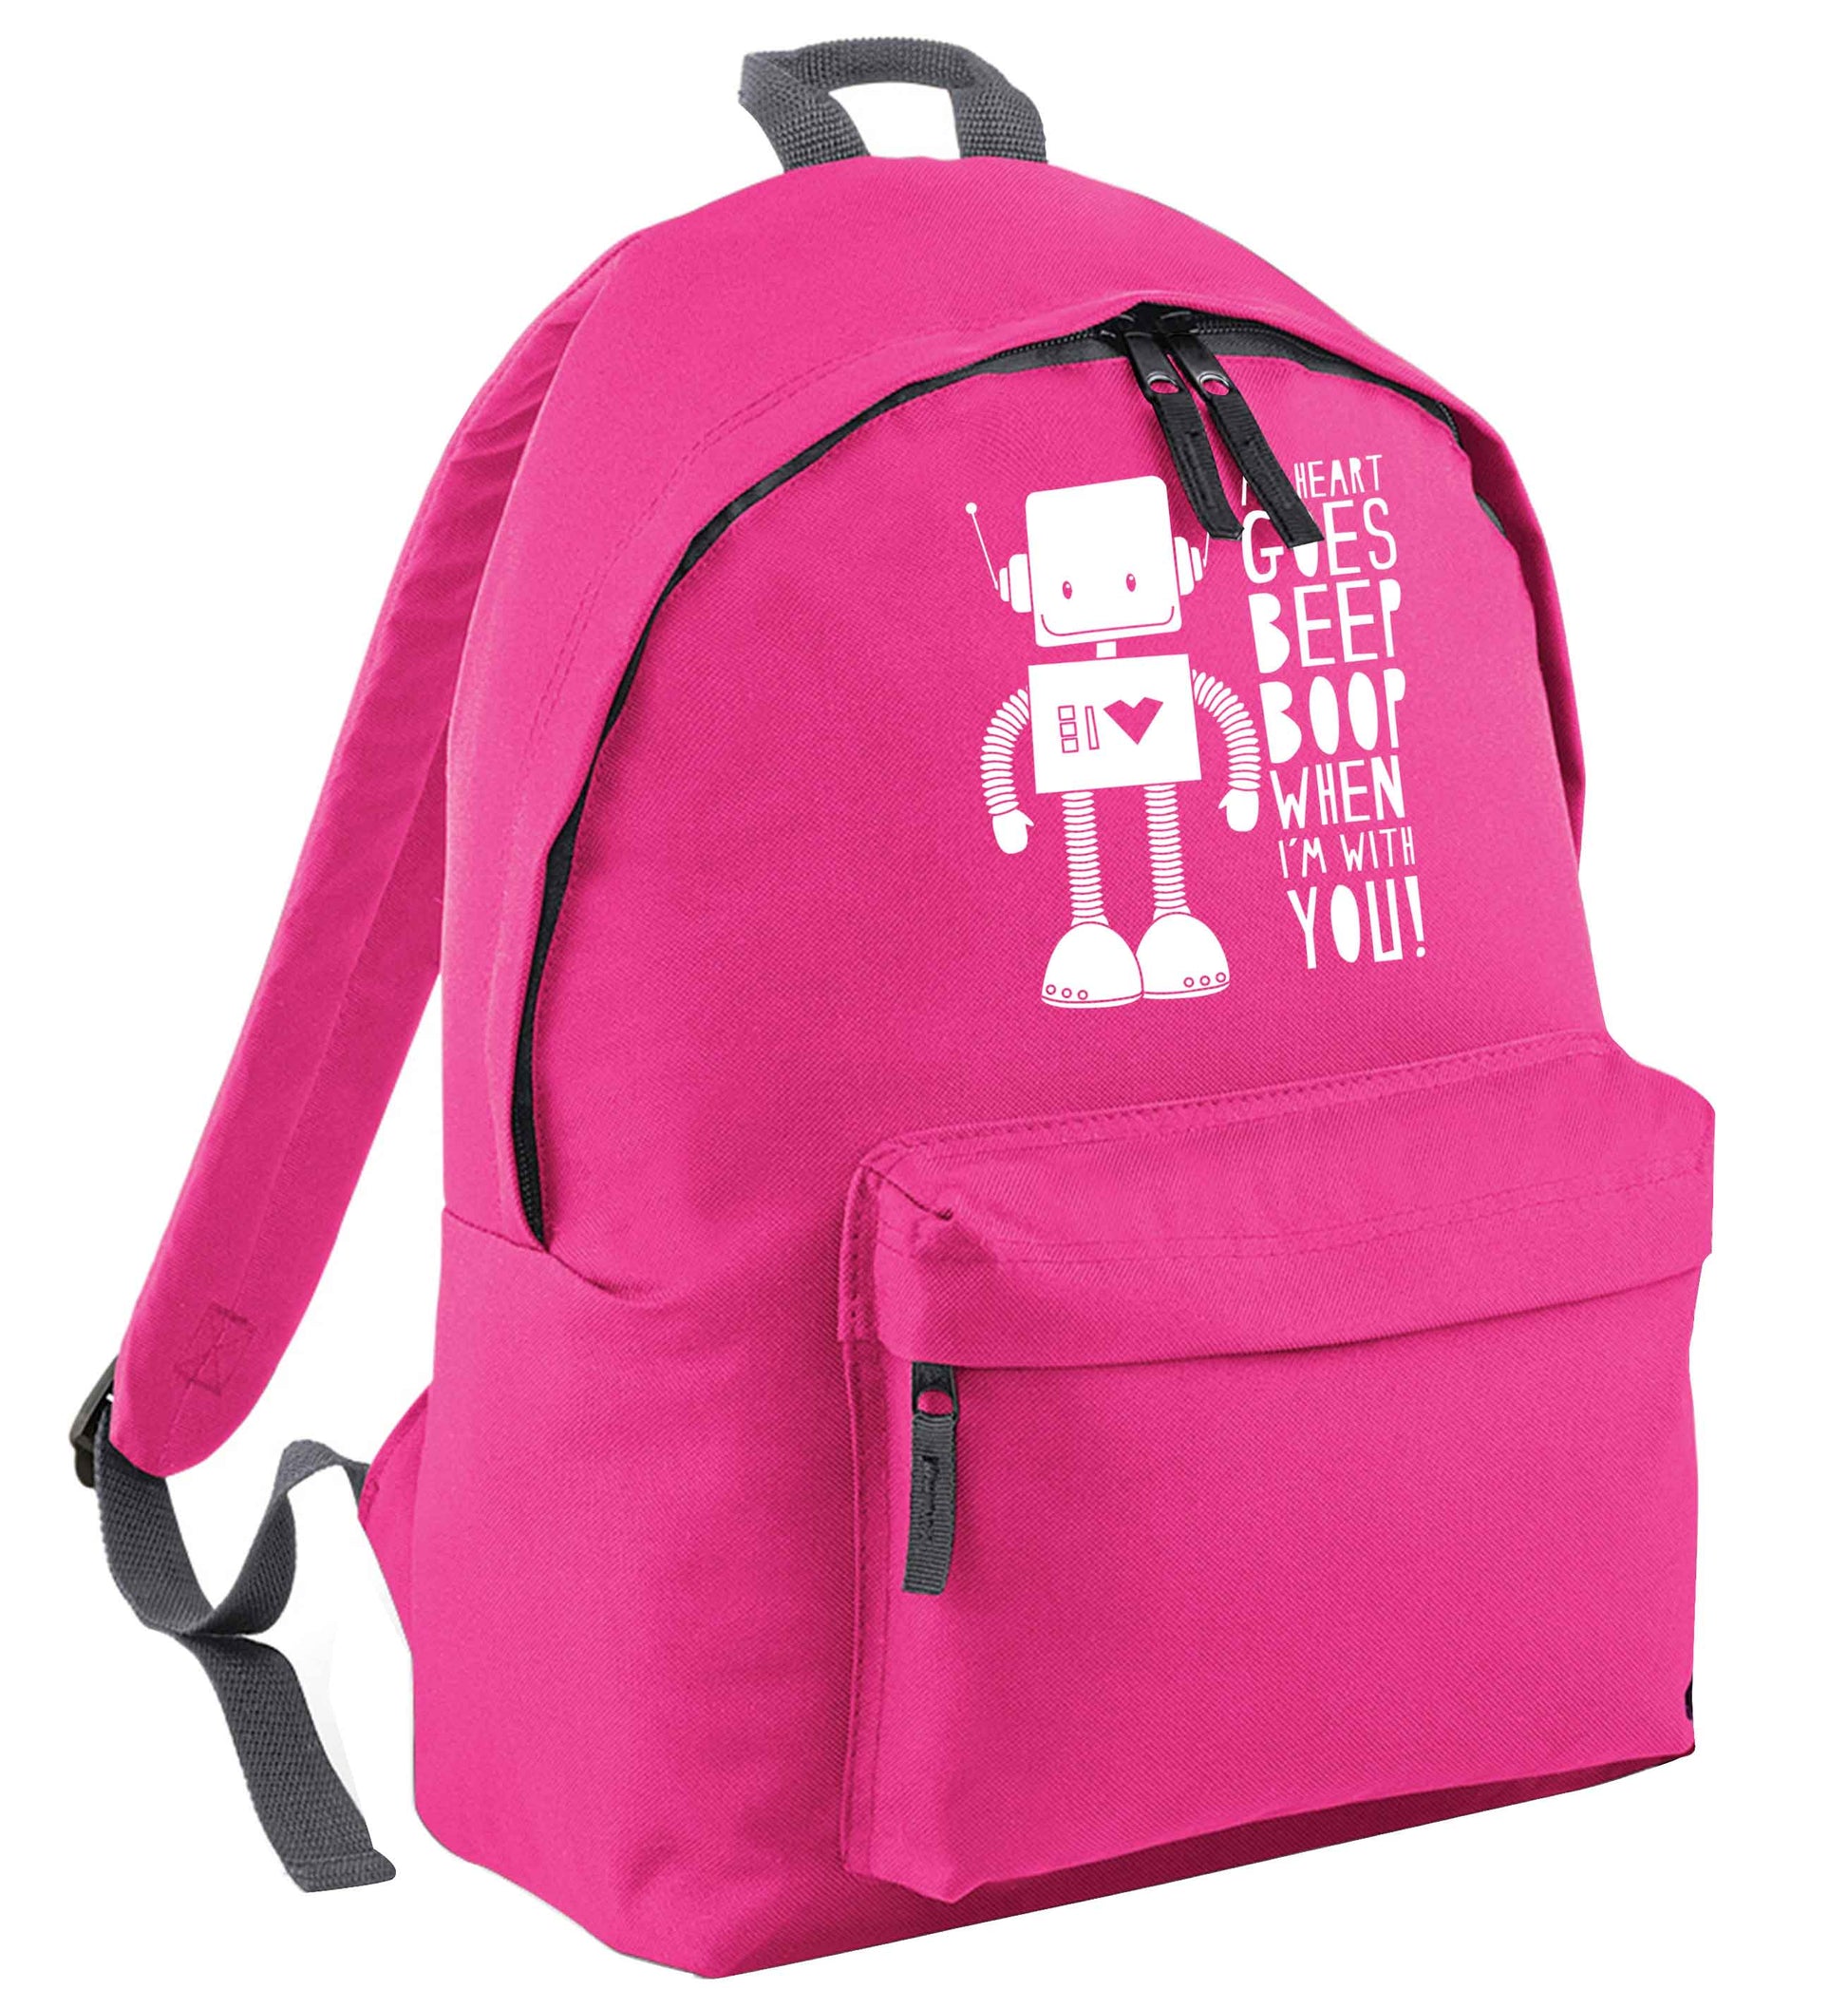 My heart goes beep boop when I'm with you pink adults backpack